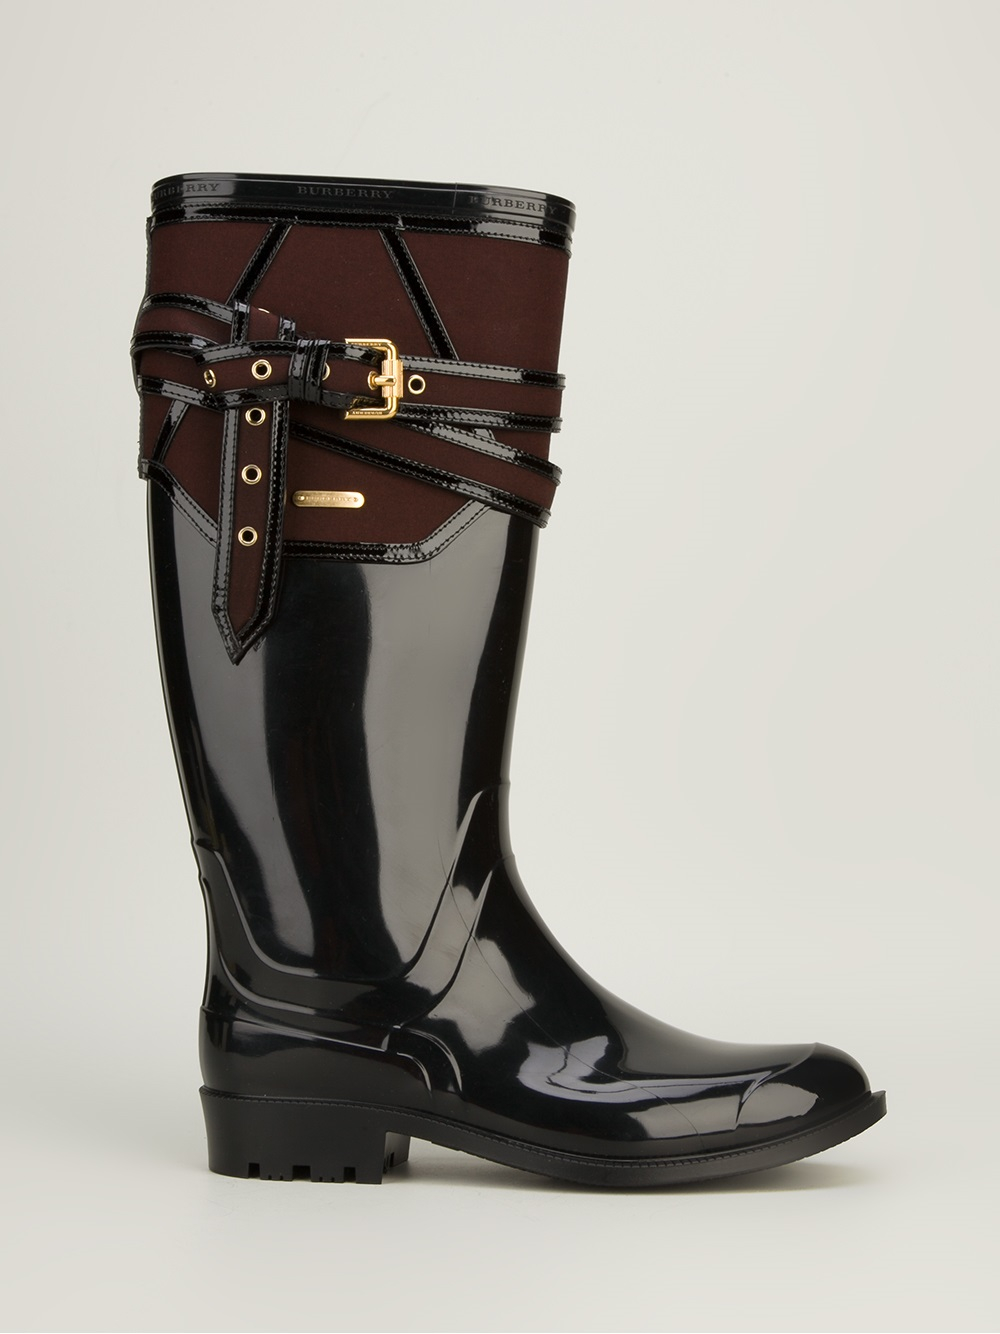 Burberry Buckled Rain Boots in Black - Lyst